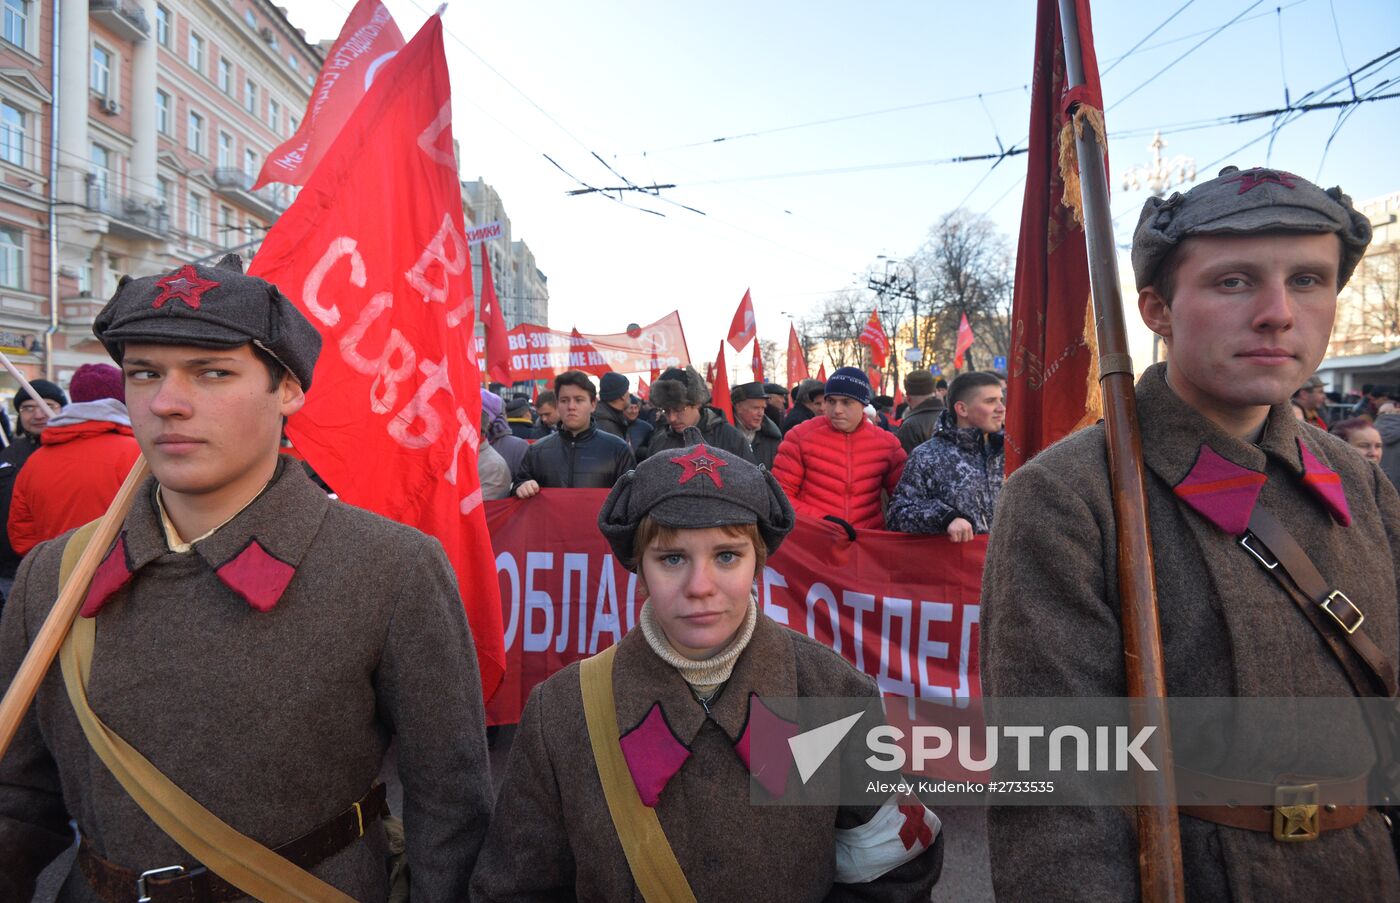 Marches and rally to mark 98th anniversary of October Revolution